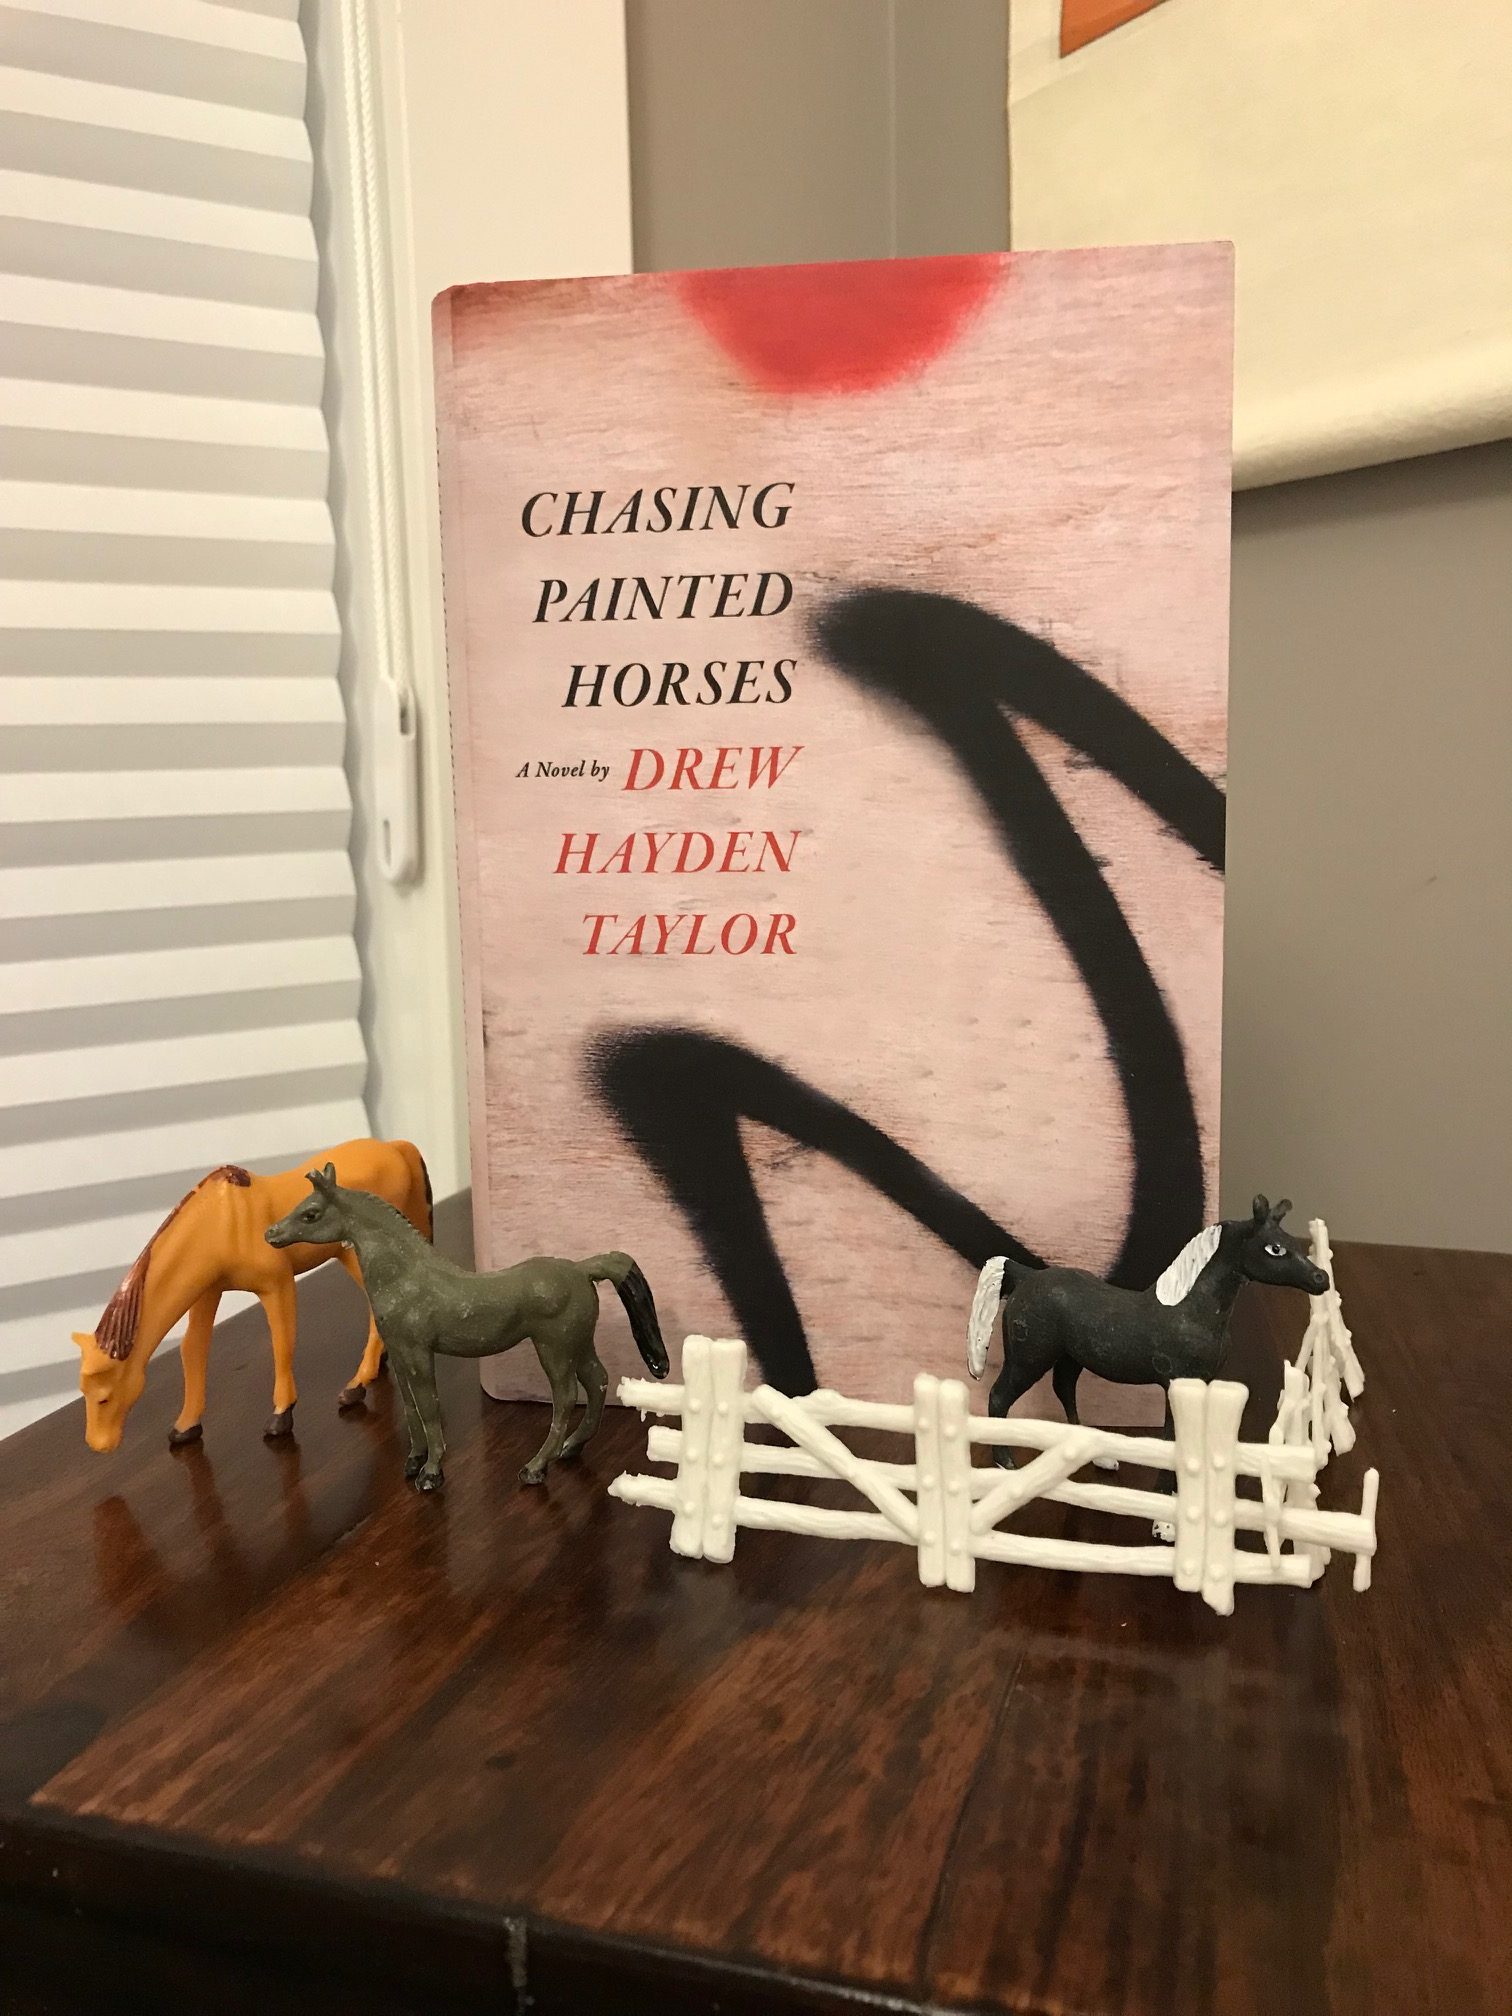 Chasing Painted Horses by Drew Hayden Taylor book, with small plastic horses and a white fence setup around the book